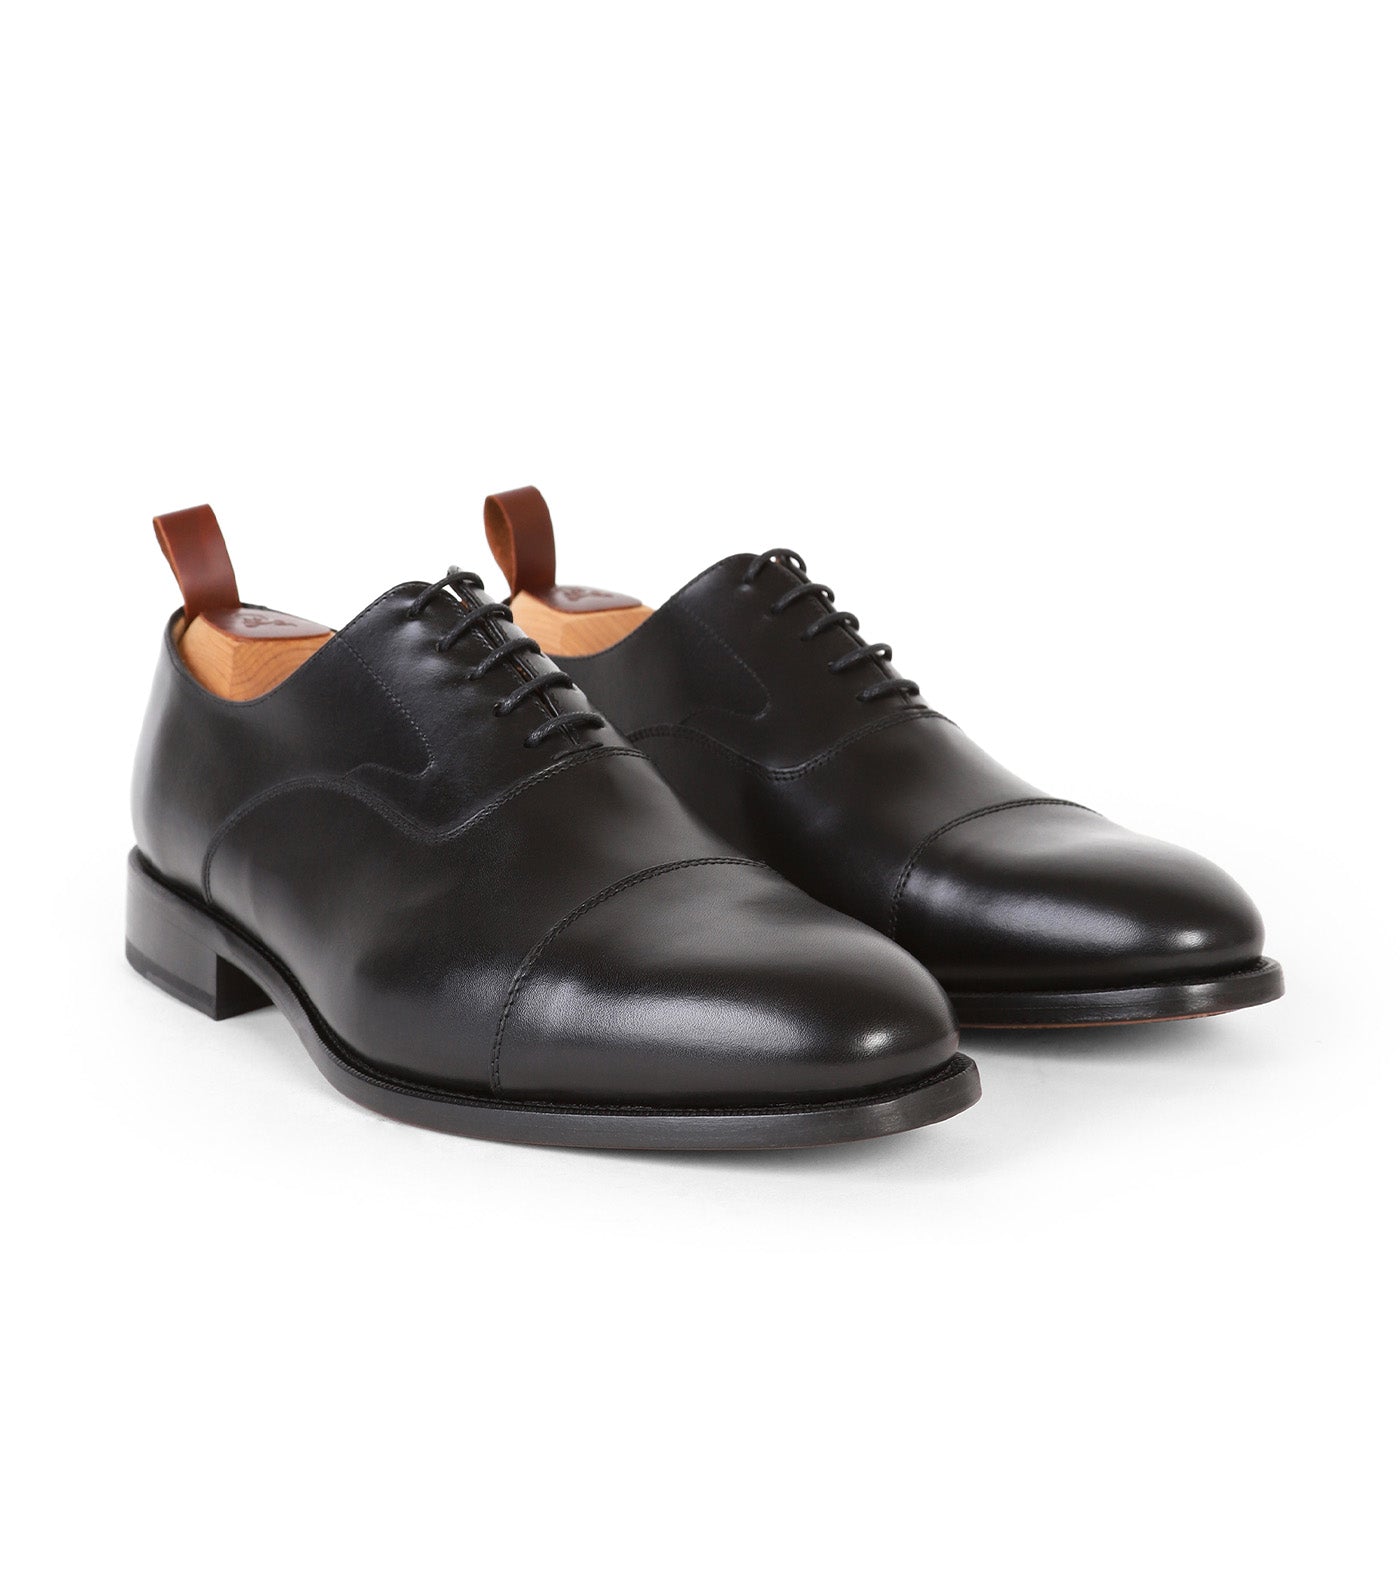 Smart Leather Oxford Shoes Black